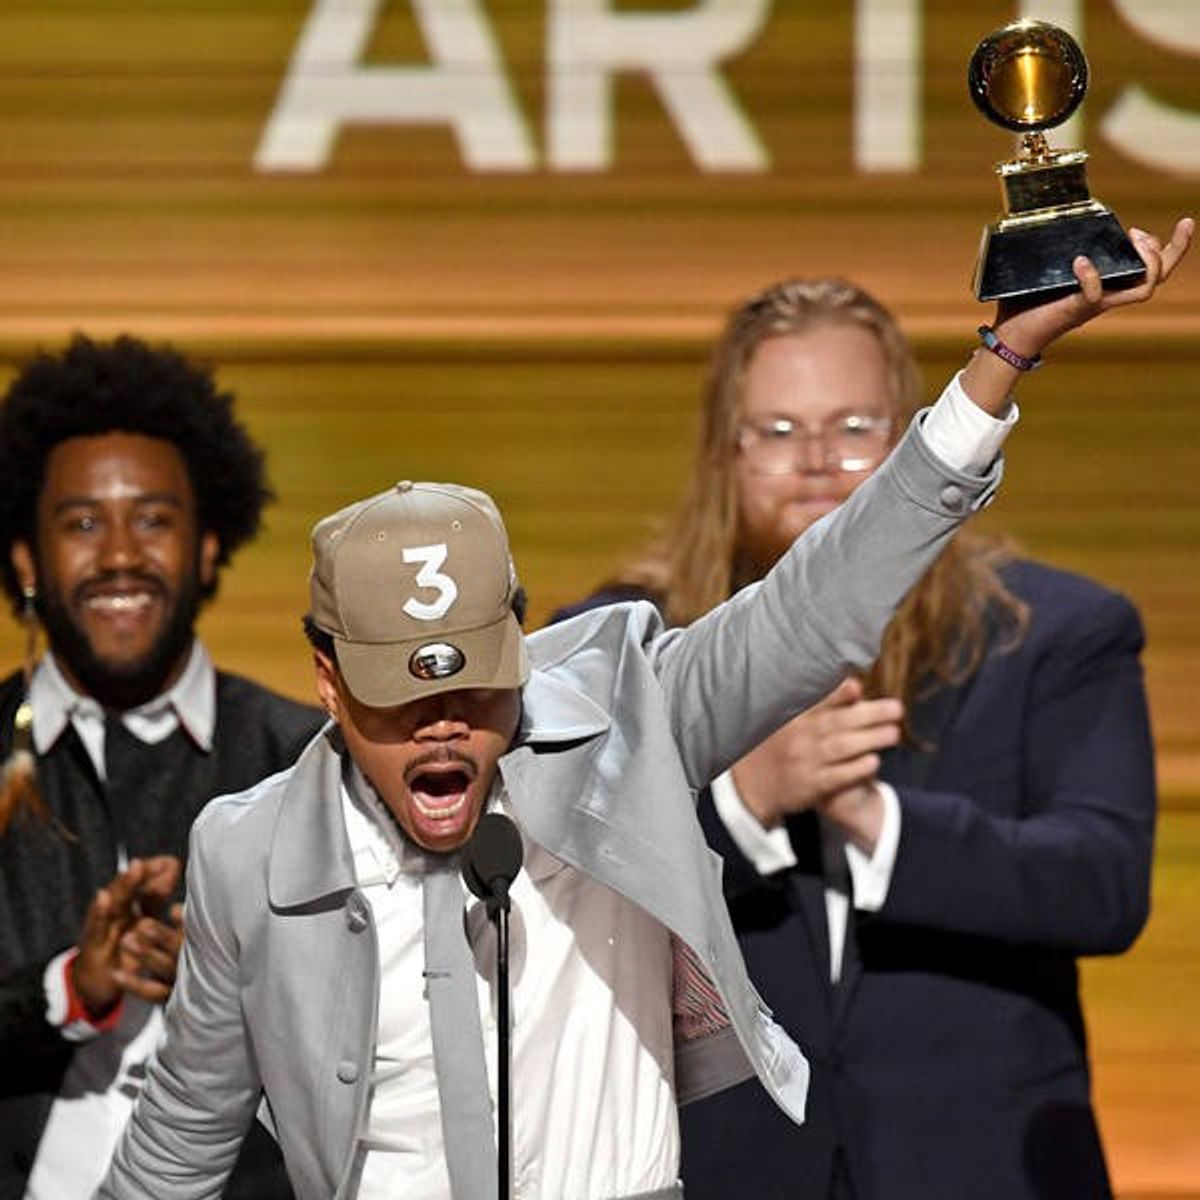 Chance’s Groundbreaking Night At The Grammy’s